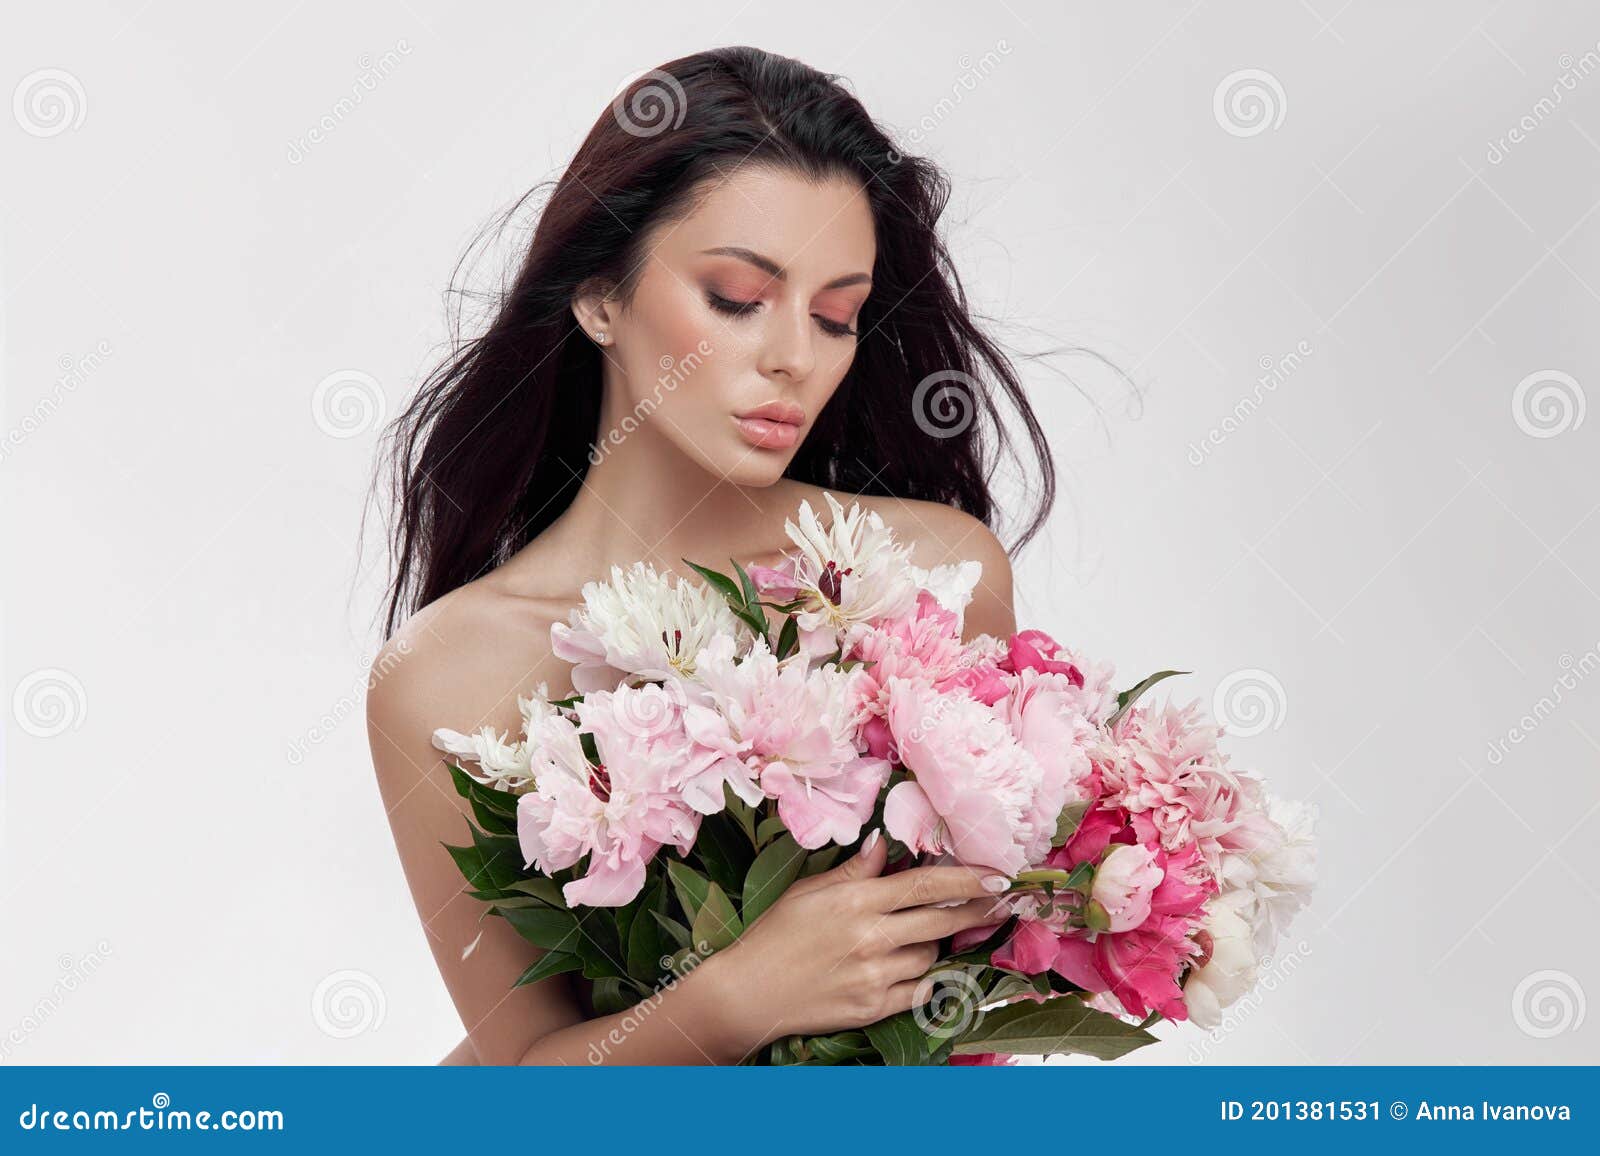 Brunette Woman Holding A Large Bouquet Of Peony Flowers Perfect Makeup